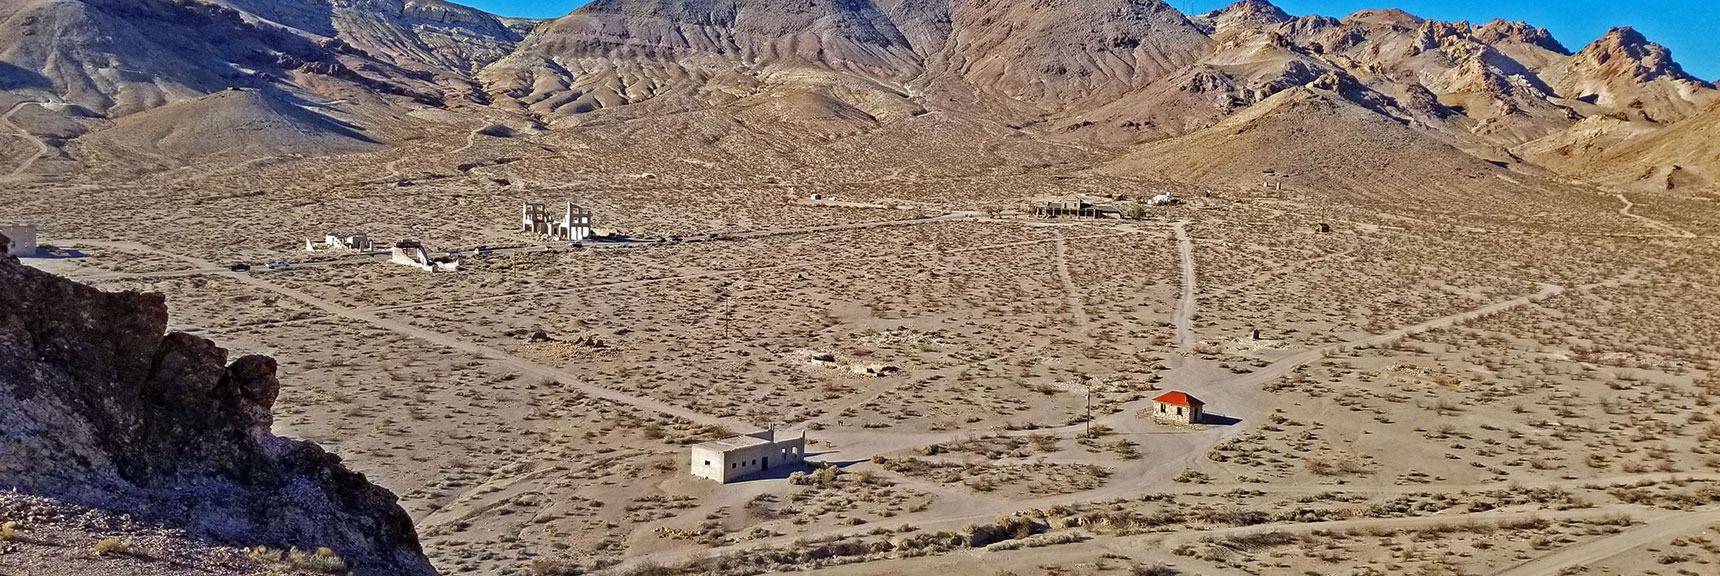 Aerial View of Rhyolite from Hill Above | Rhyolite Ghost Town | Death Valley Area, Nevada